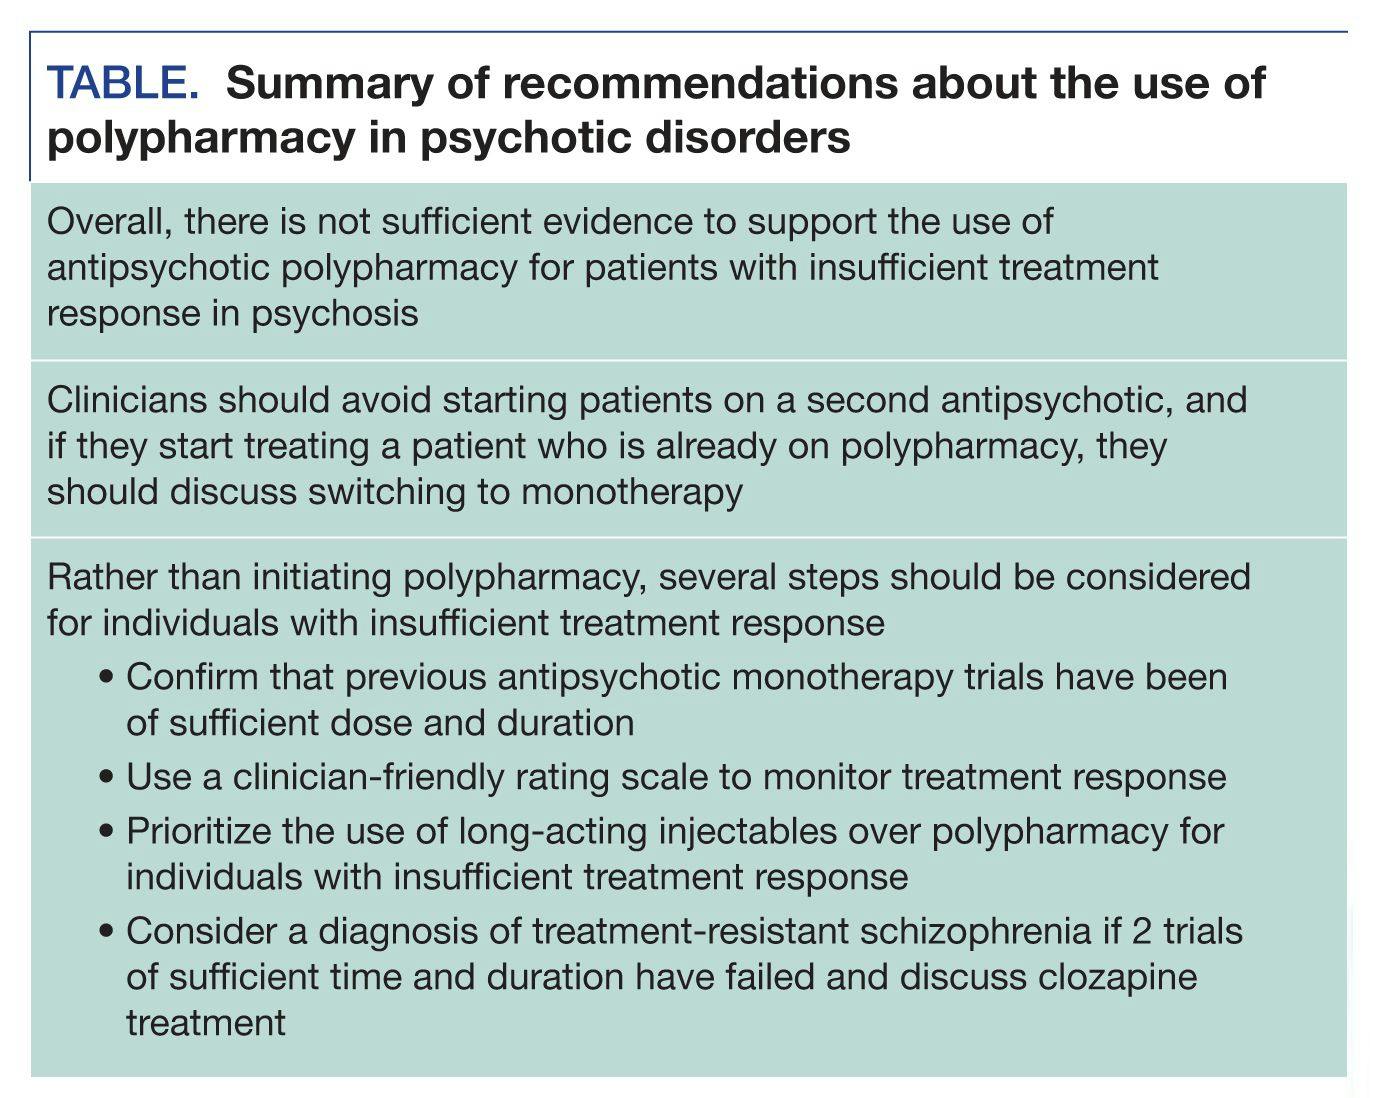 Summary of recommendations about the use of polypharmacy in psychotic disorders